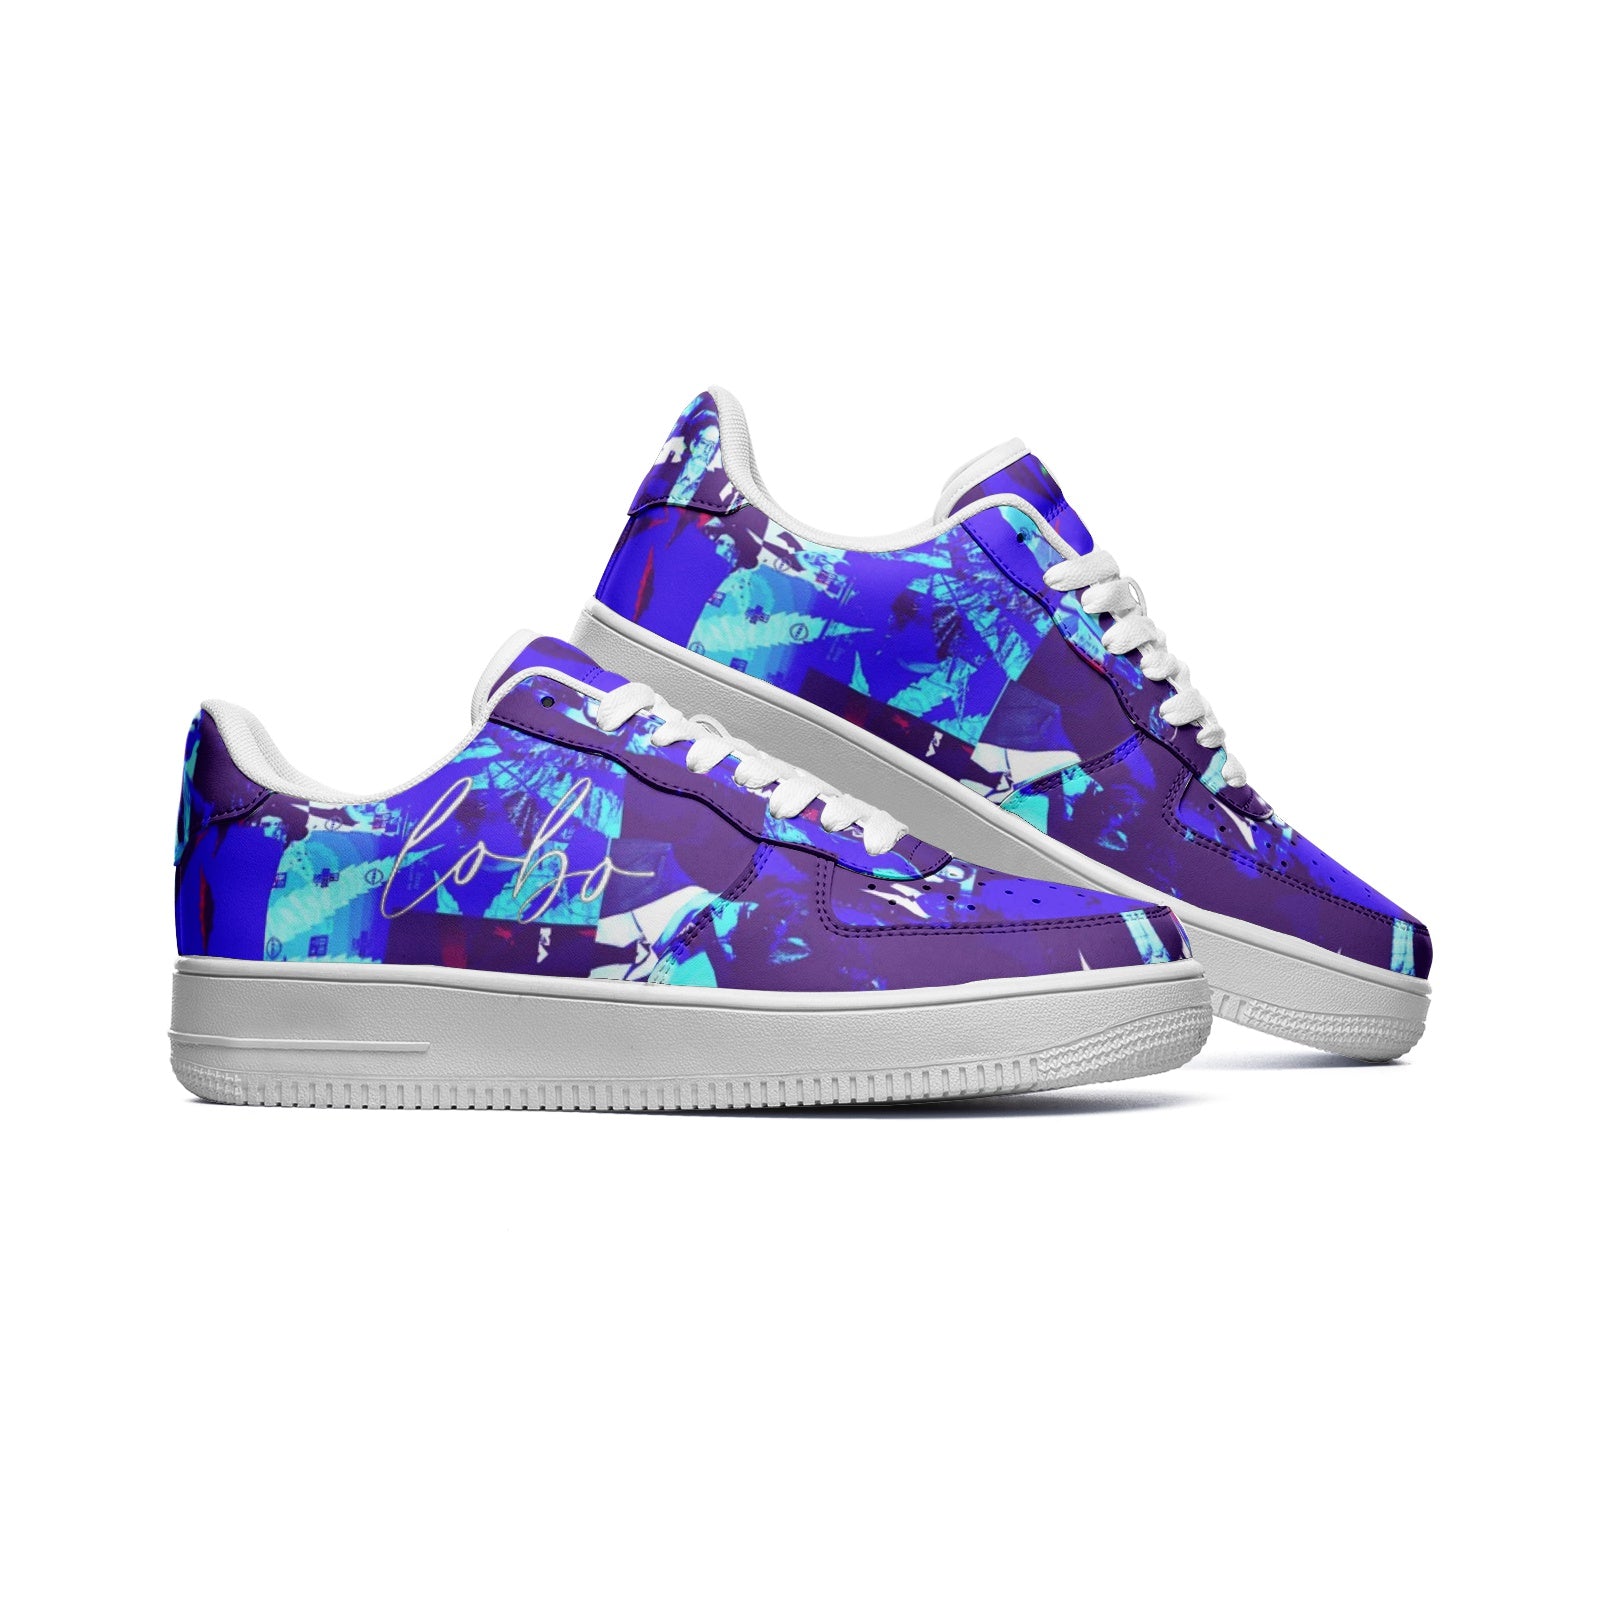 Unisex Low Top Leather Sneakers Printy6